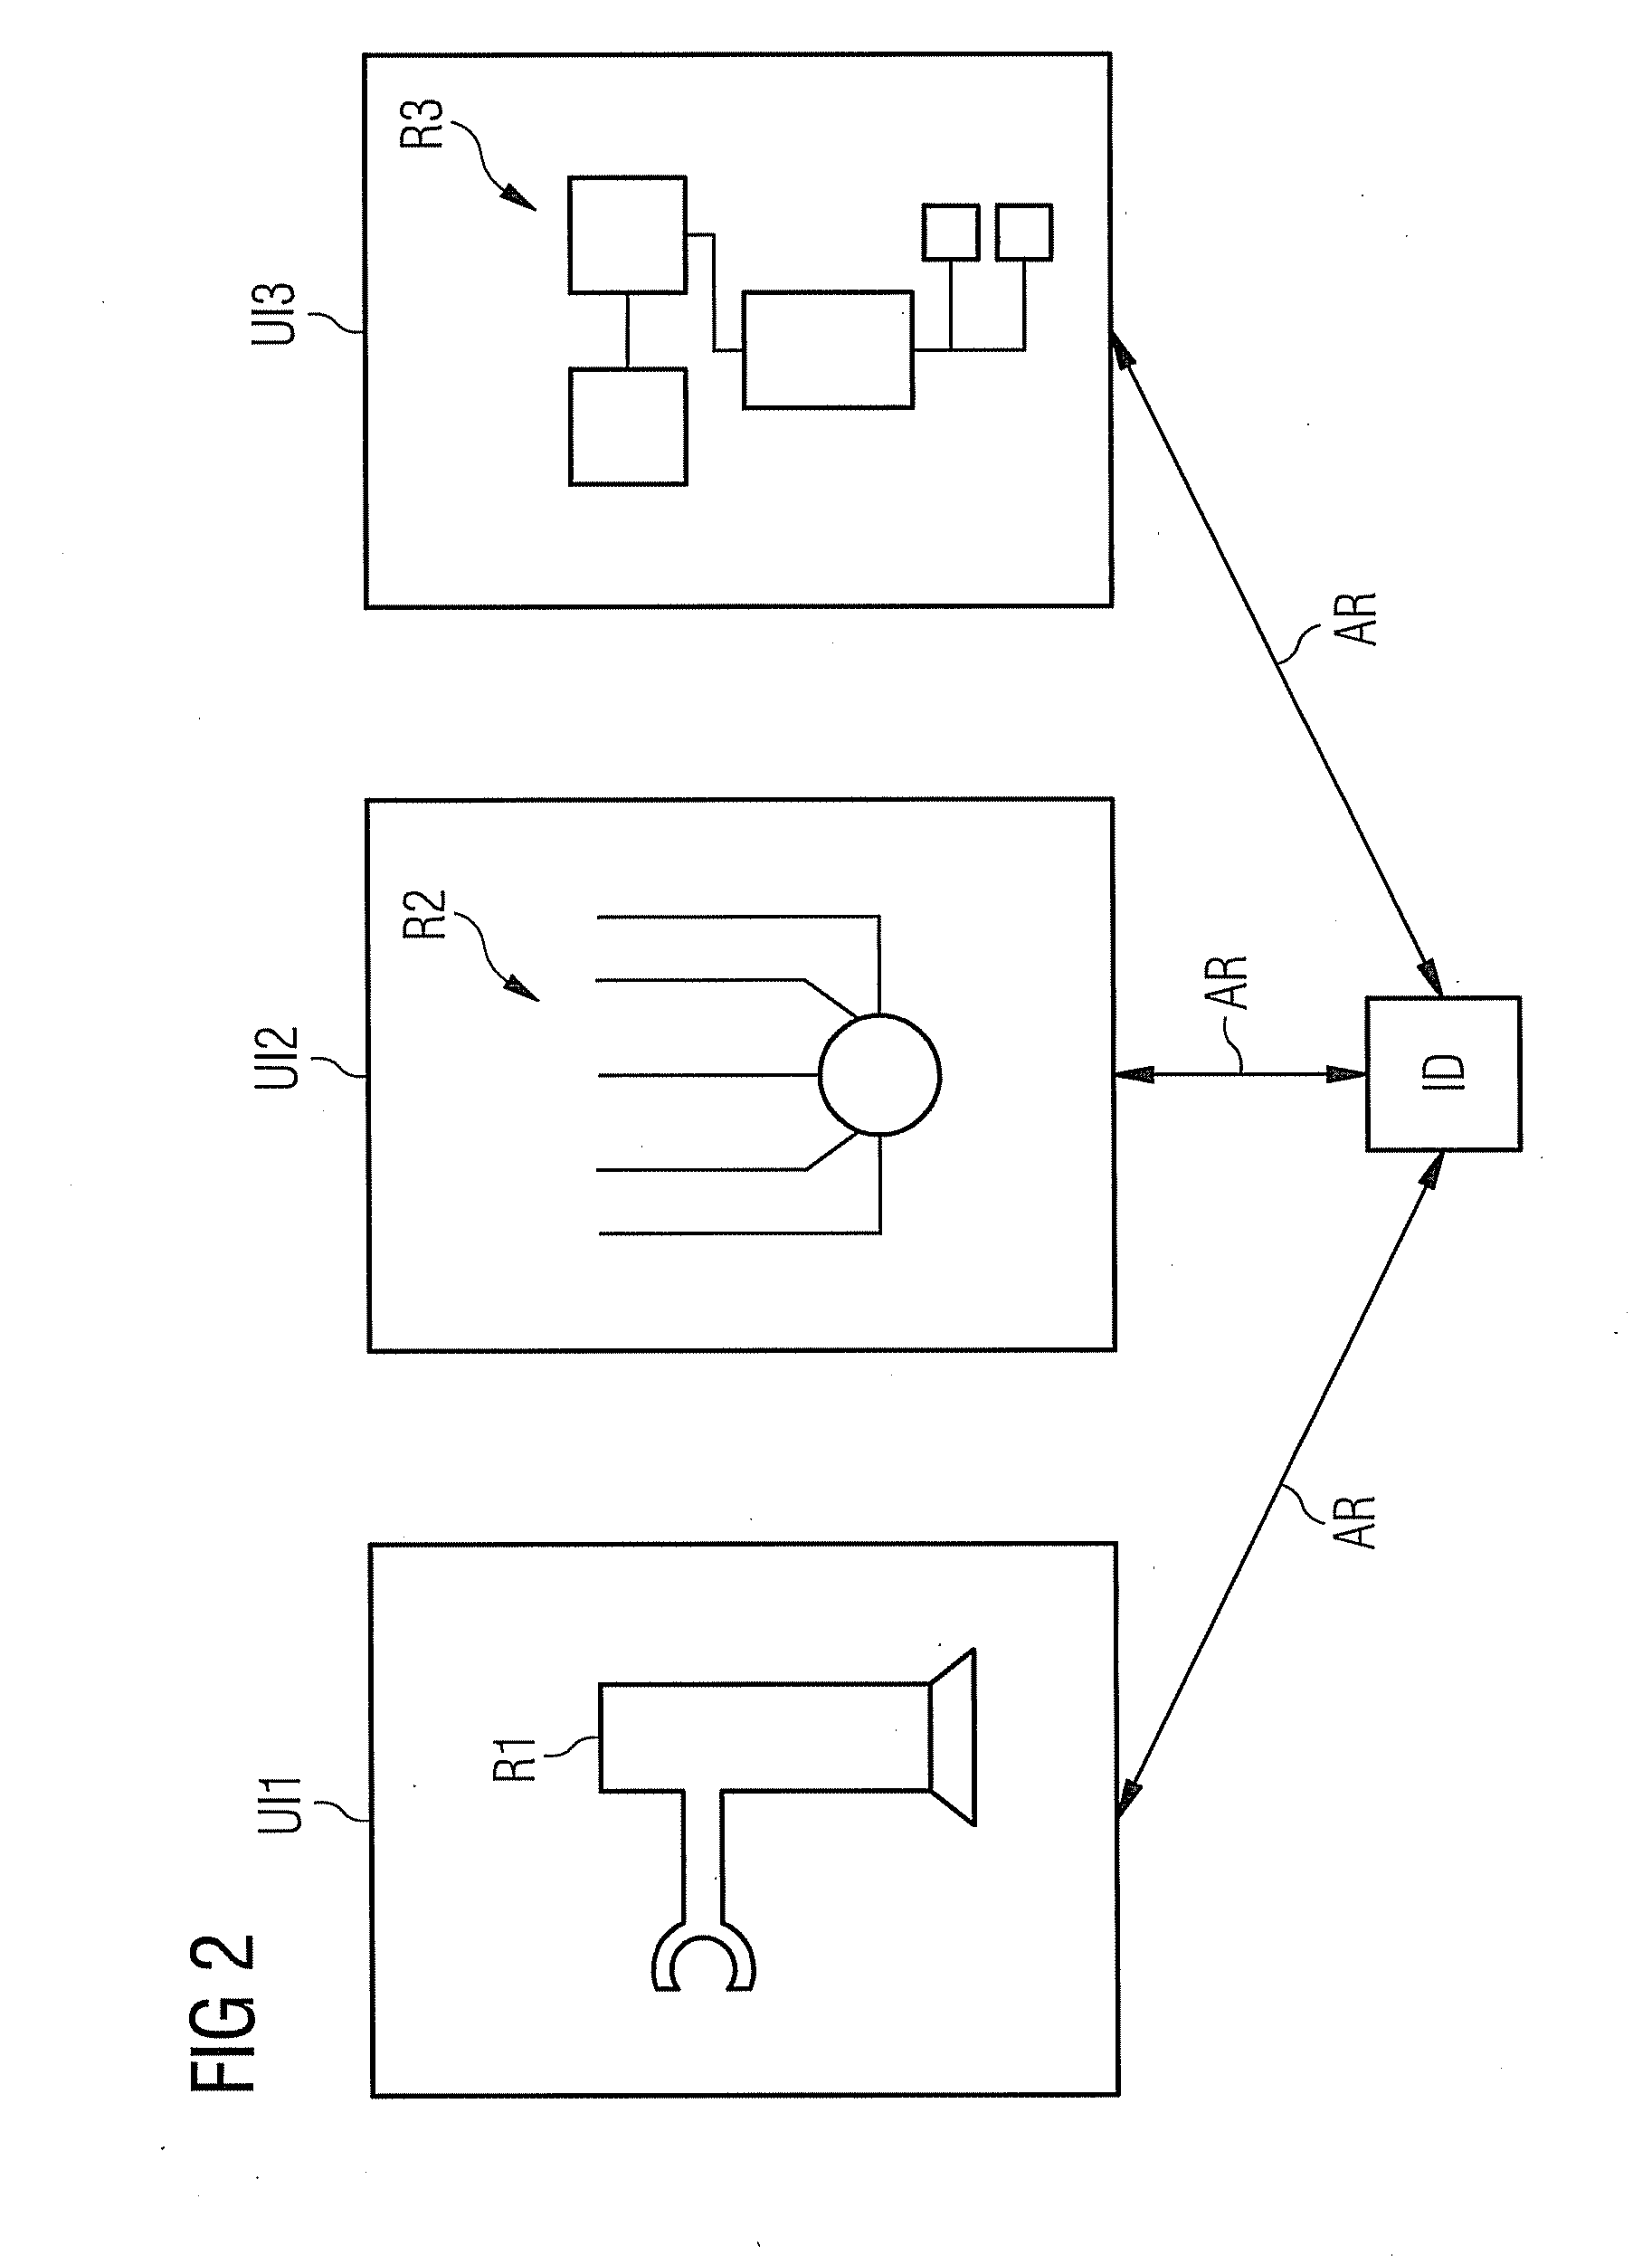 Method for computer assisted planning of a technical system